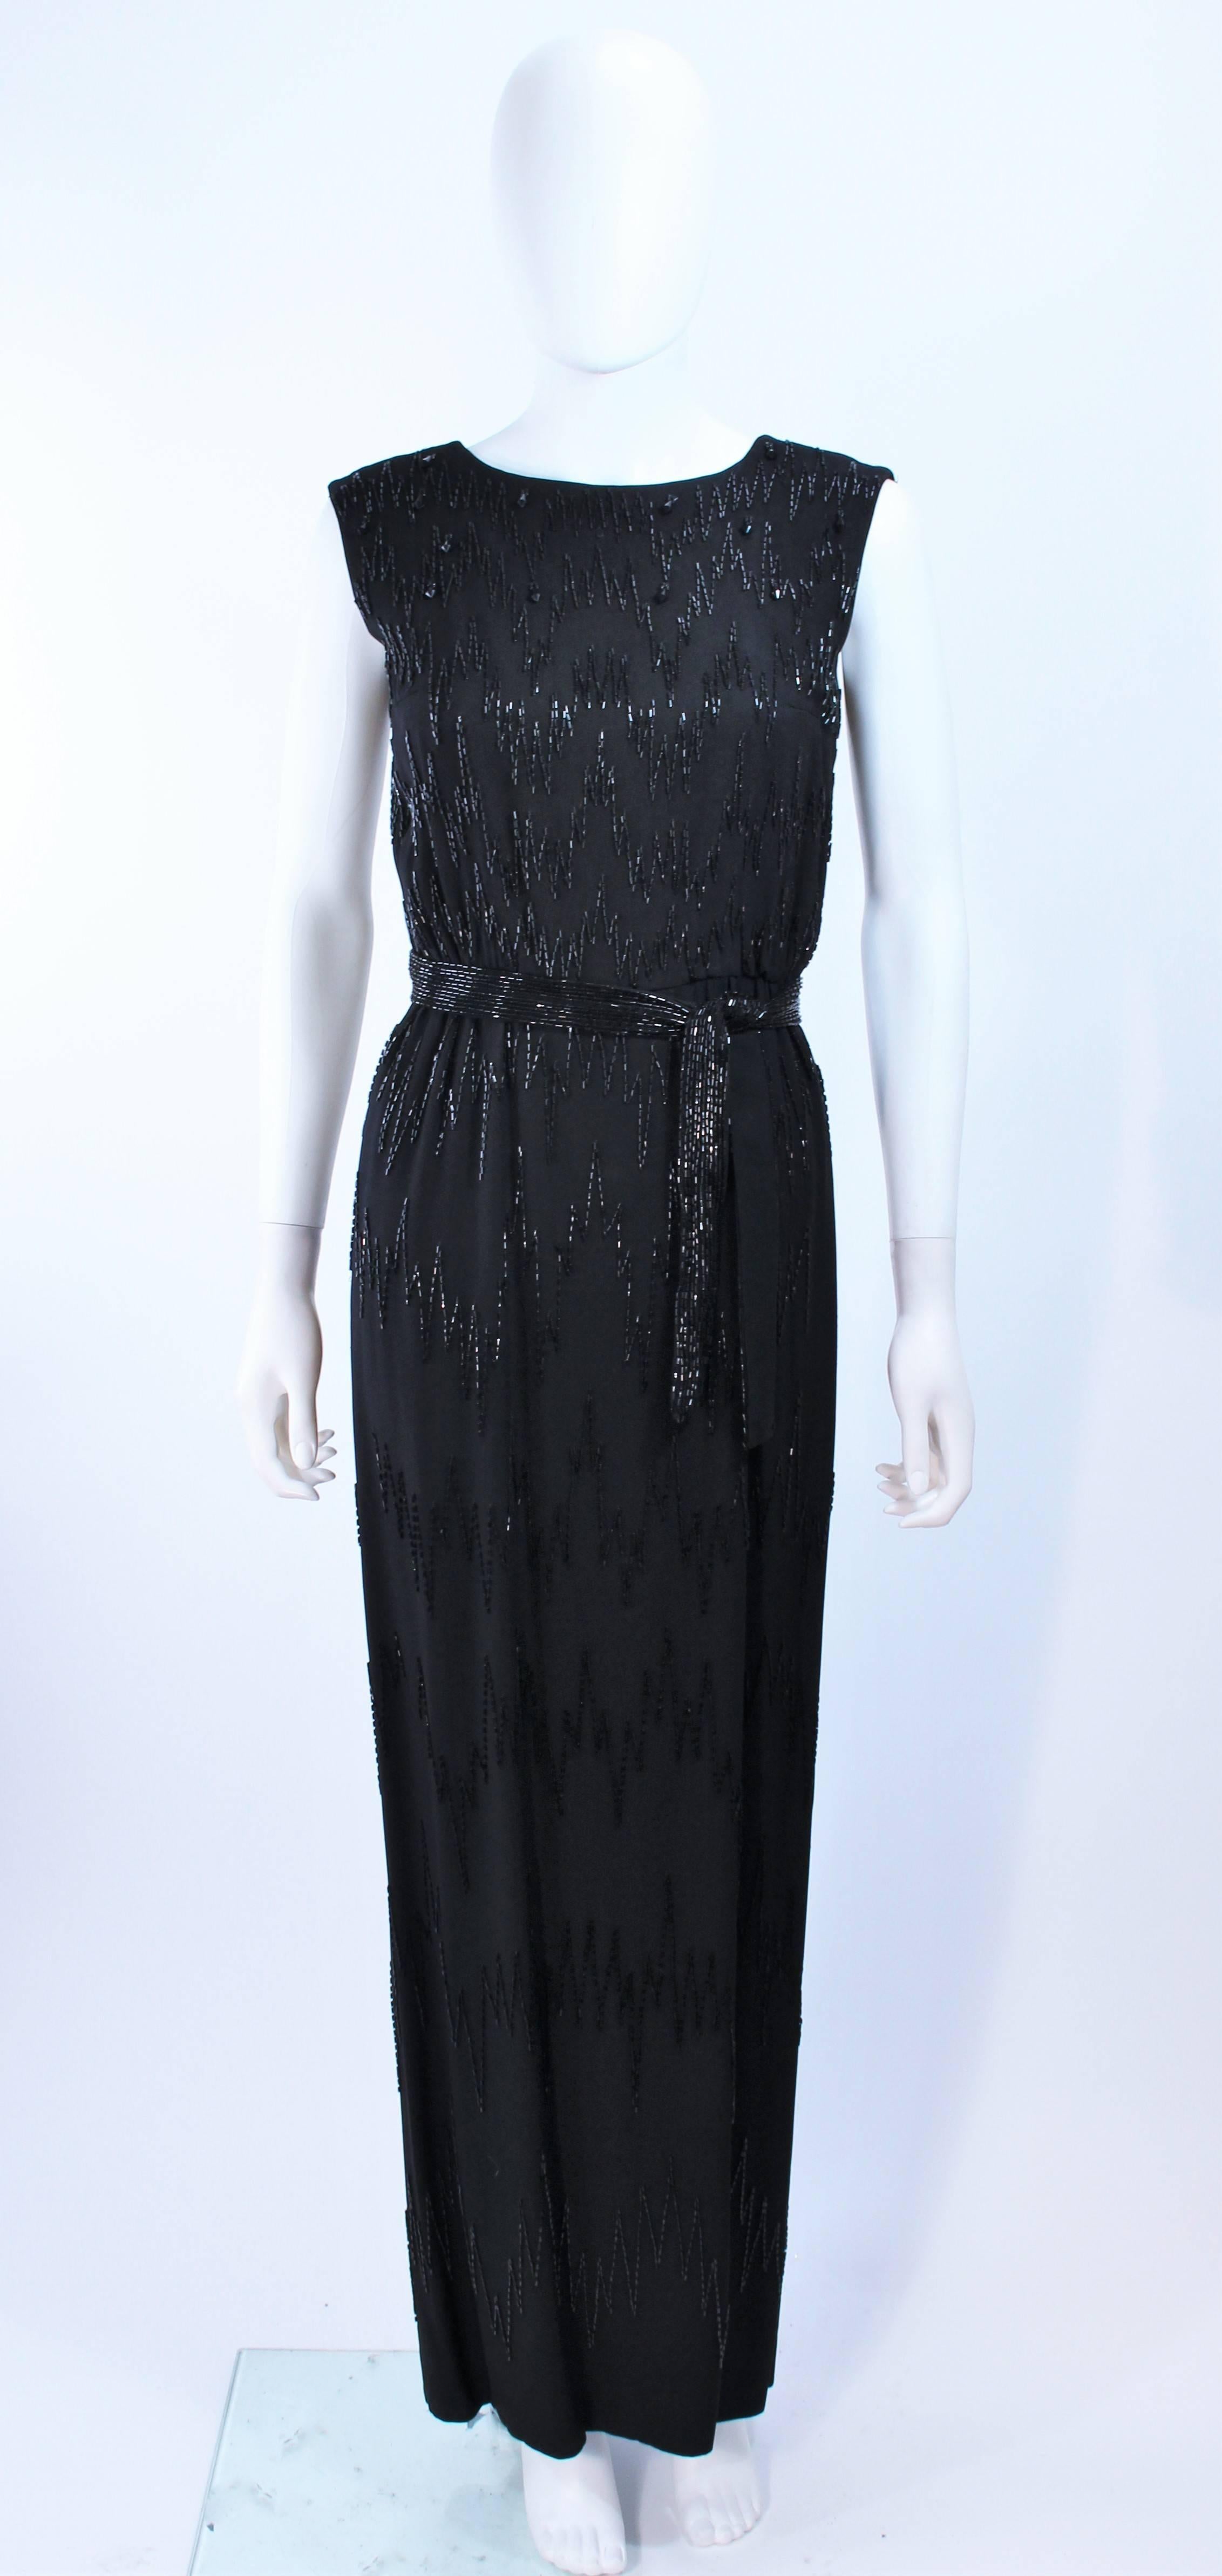 This gown is composed of black silk with a zig zag hand beaded applique. Features a beaded belt. There is a center back zipper closure. In excellent vintage condition, some beading missing.

**Please cross-reference measurements for personal